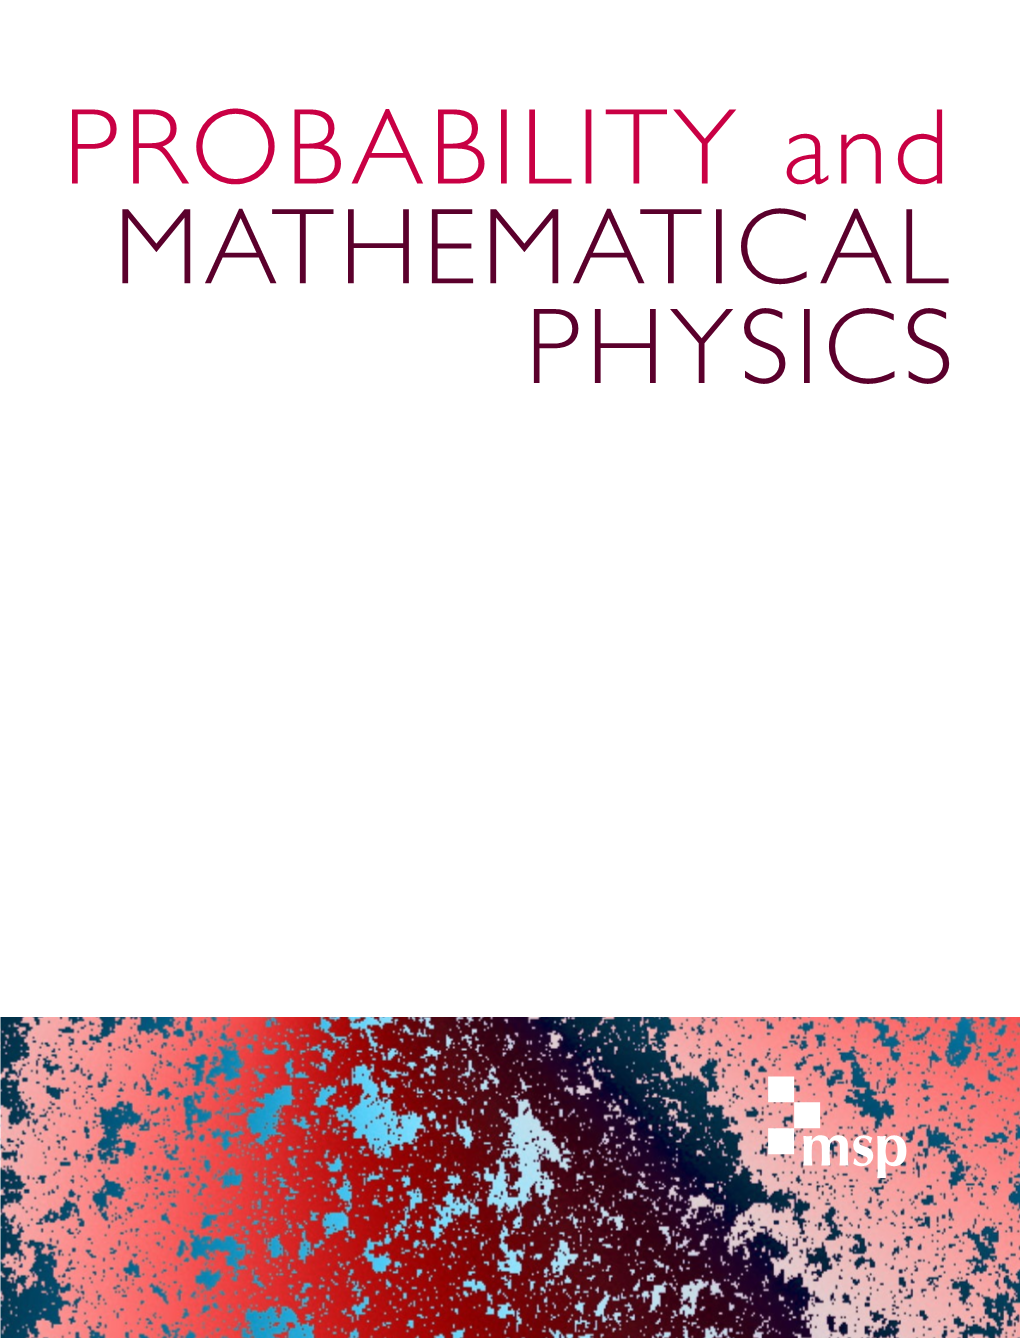 Probability and Mathematical Physics Vol. 1 (2020)